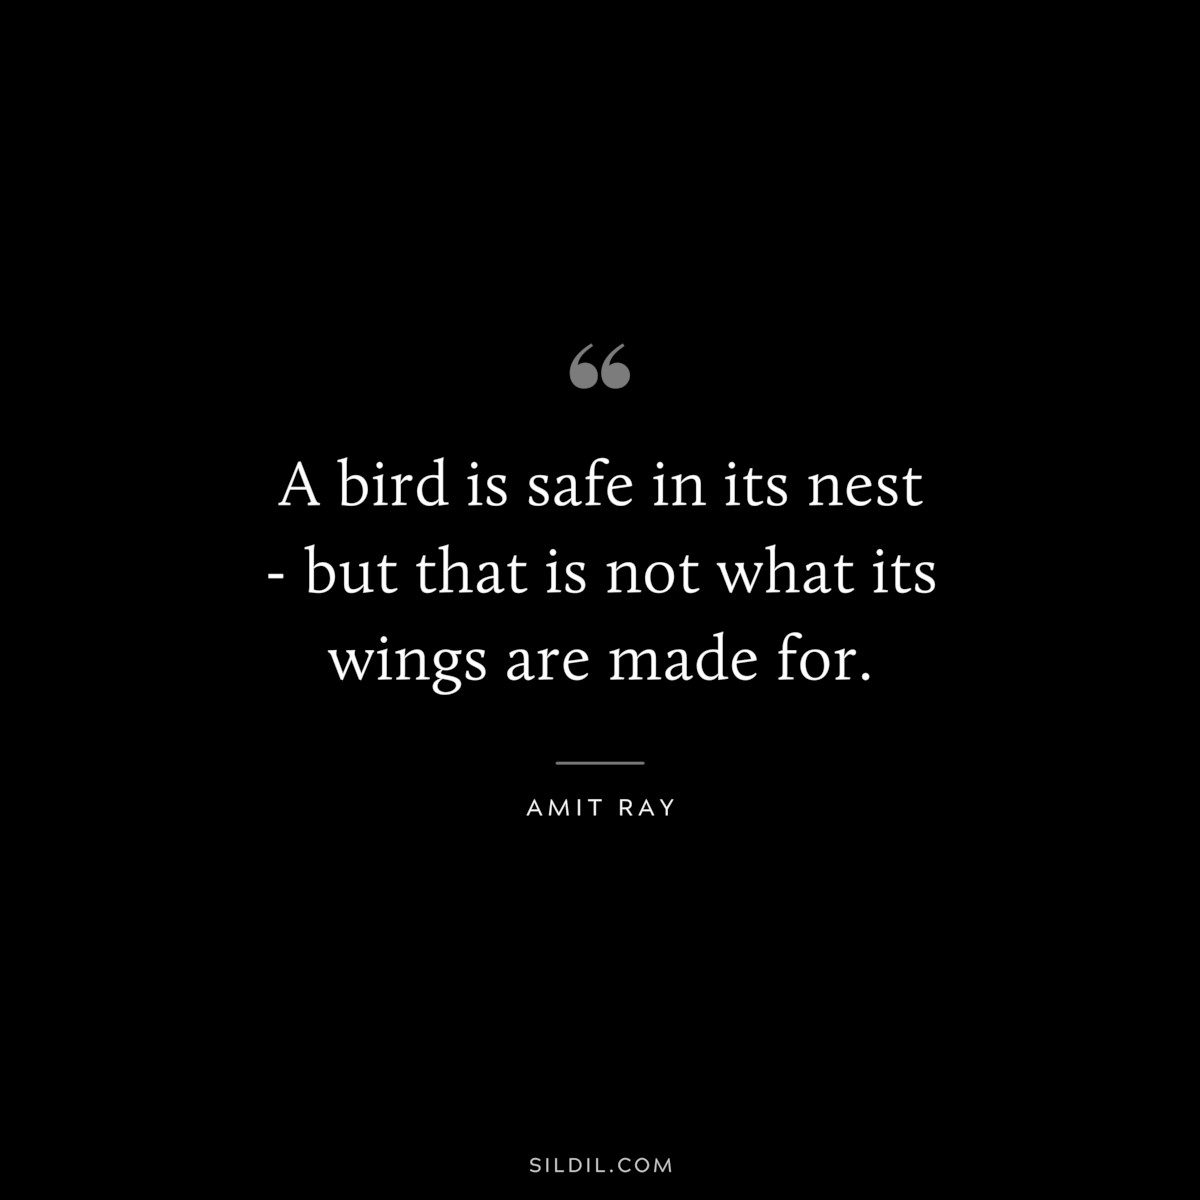 A bird is safe in its nest - but that is not what its wings are made for. ― Amit Ray